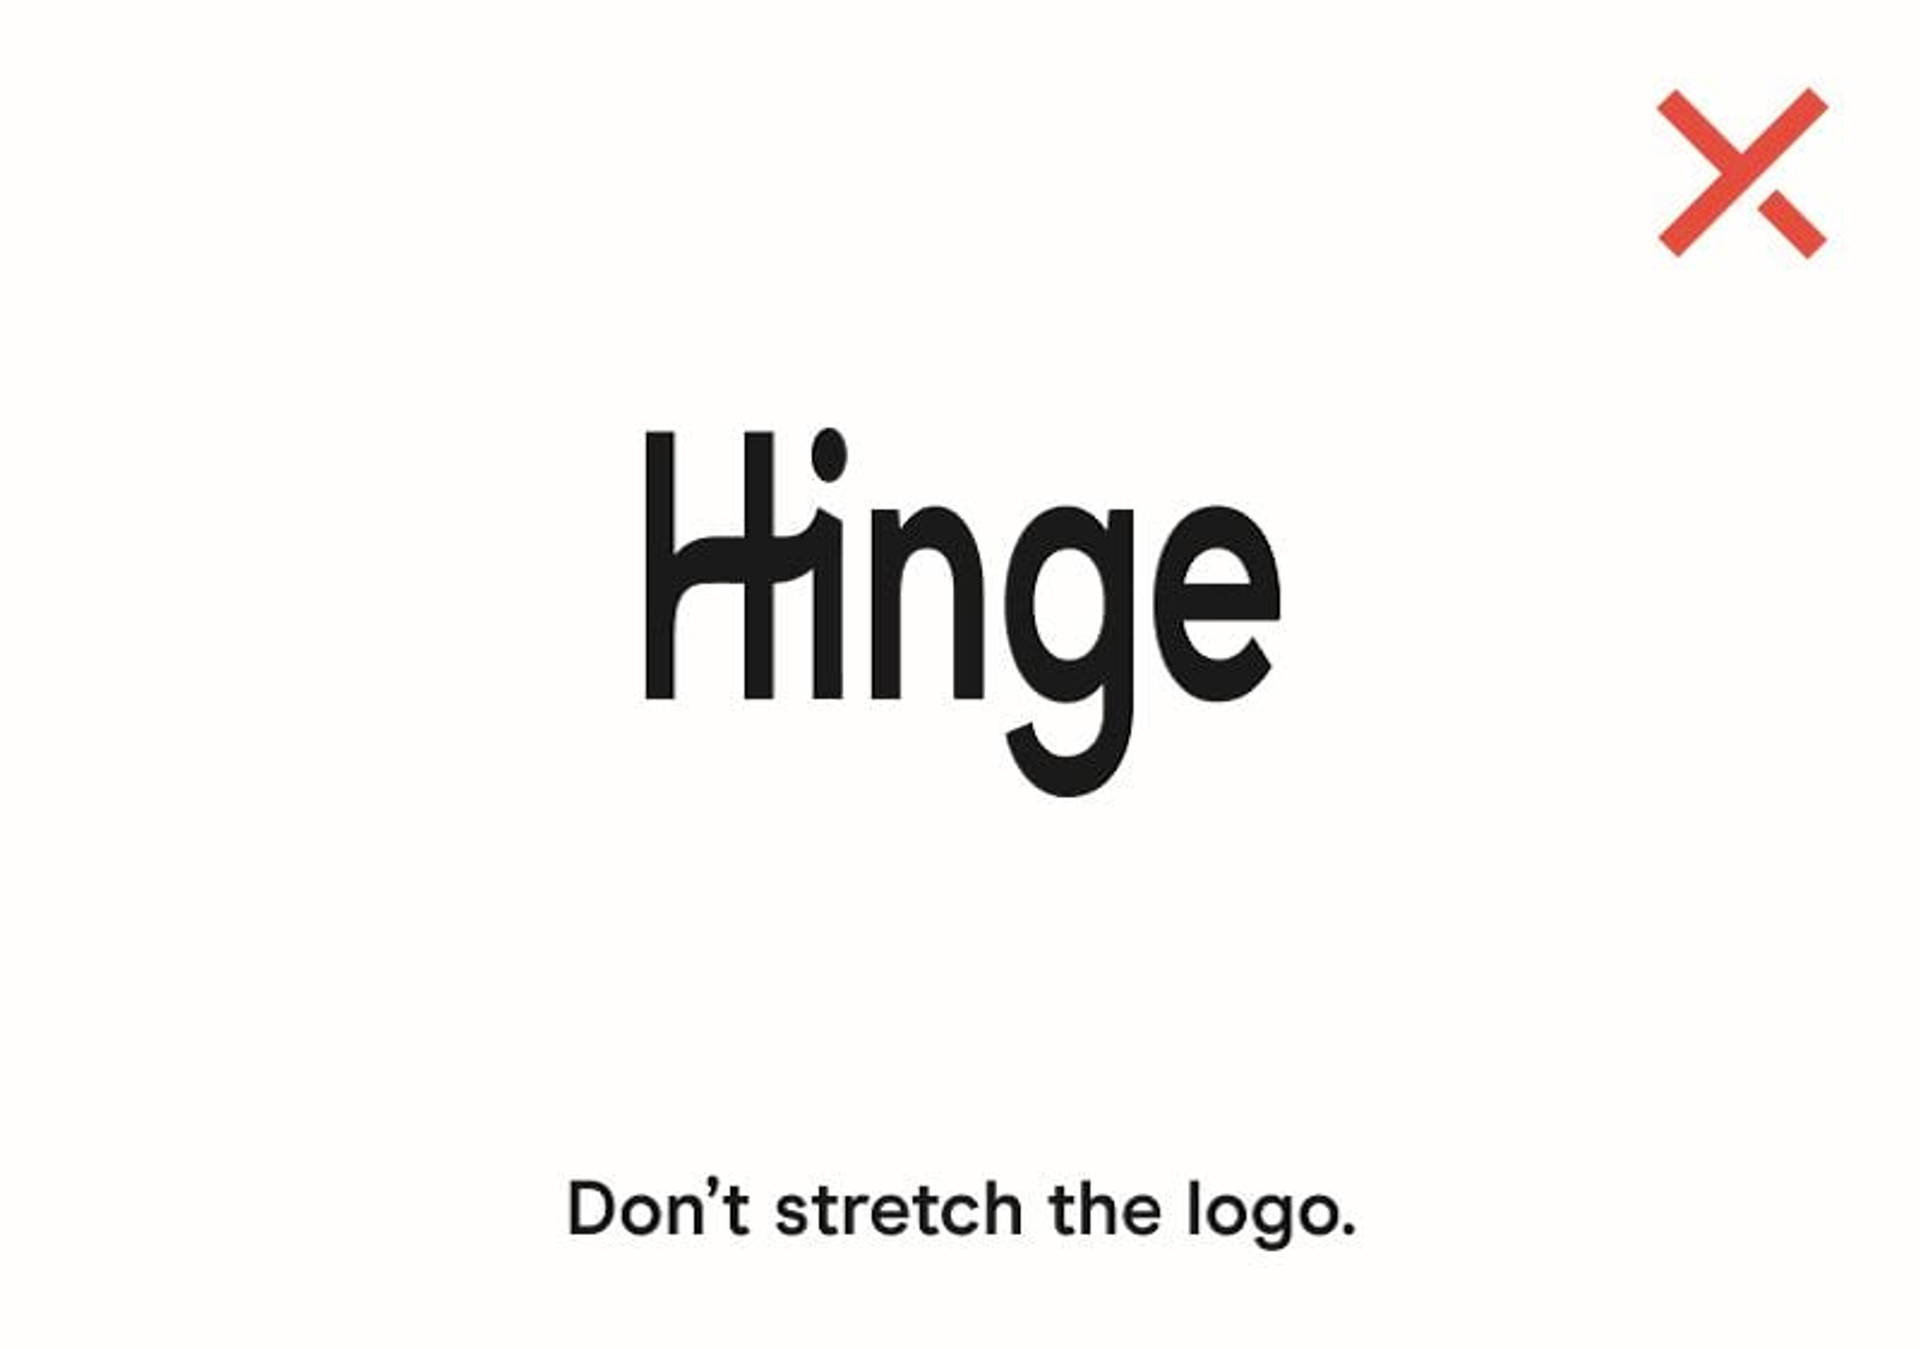 Don't stretch the logo.